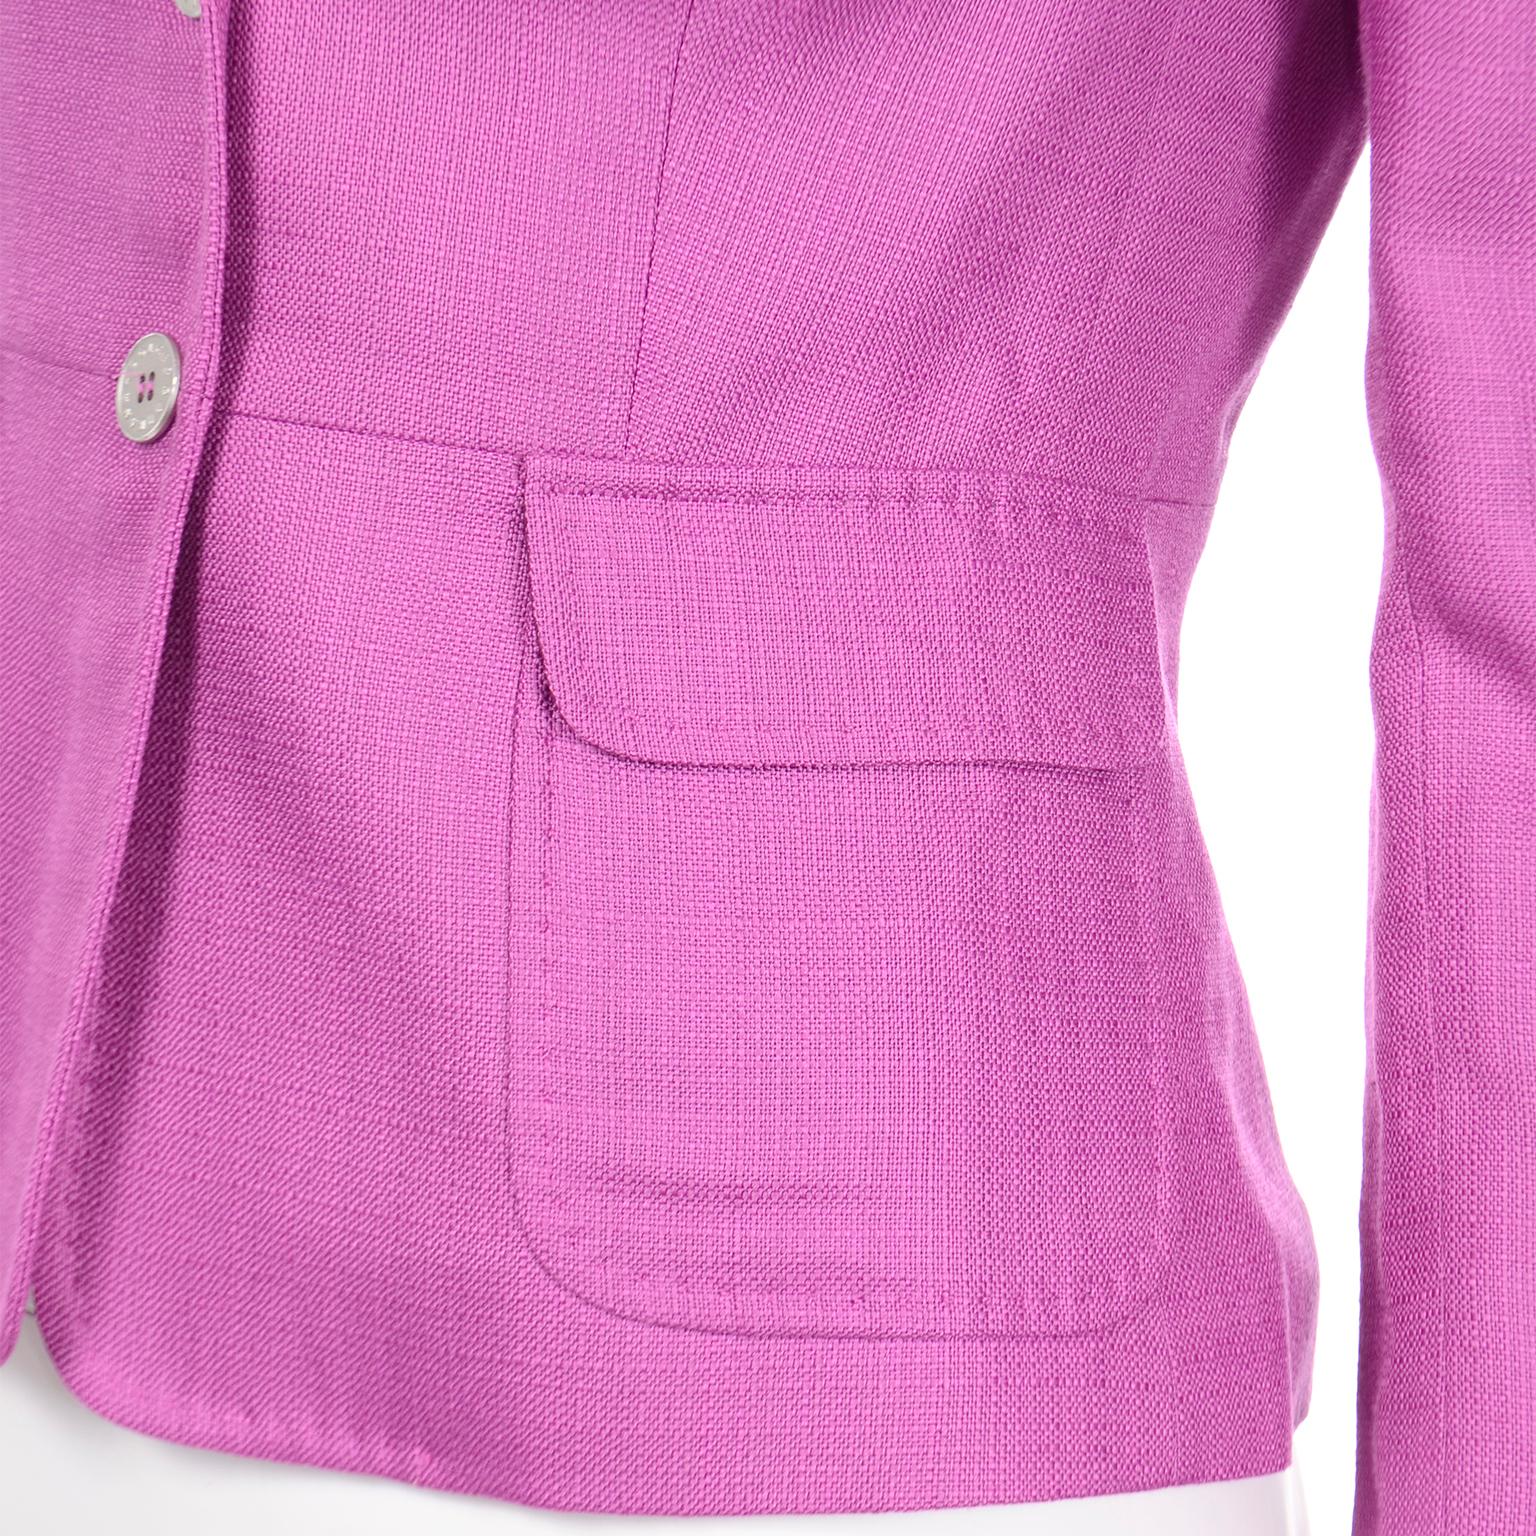 Dolce & Gabbana Purple Fitted Blazer Style Jacket In Excellent Condition For Sale In Portland, OR